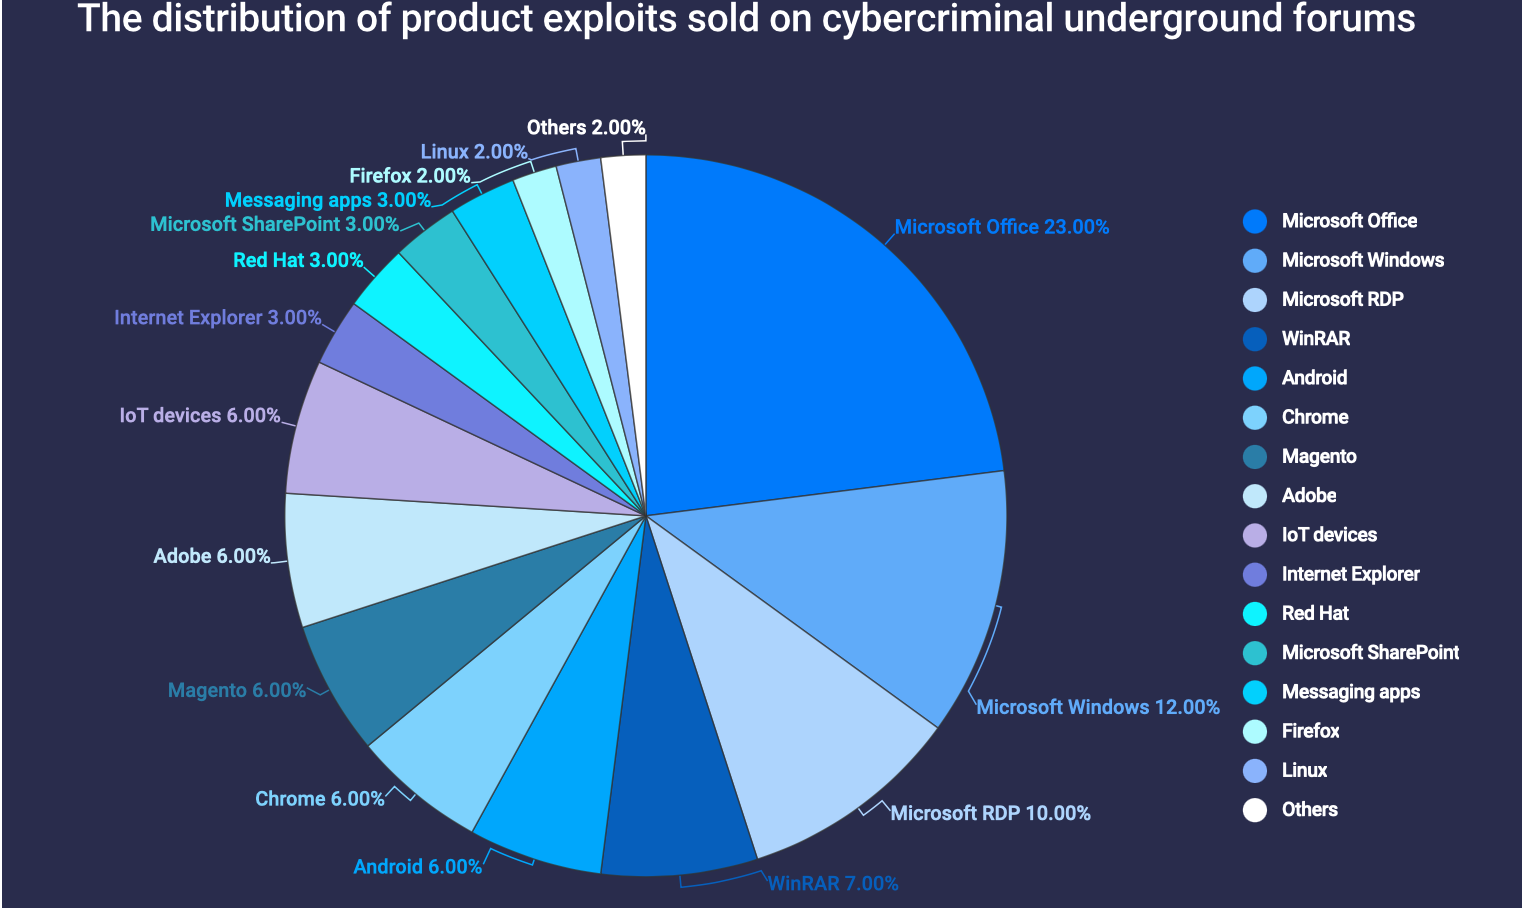 51% of Exploits Sold on Underground Forums Are for Microsoft Products